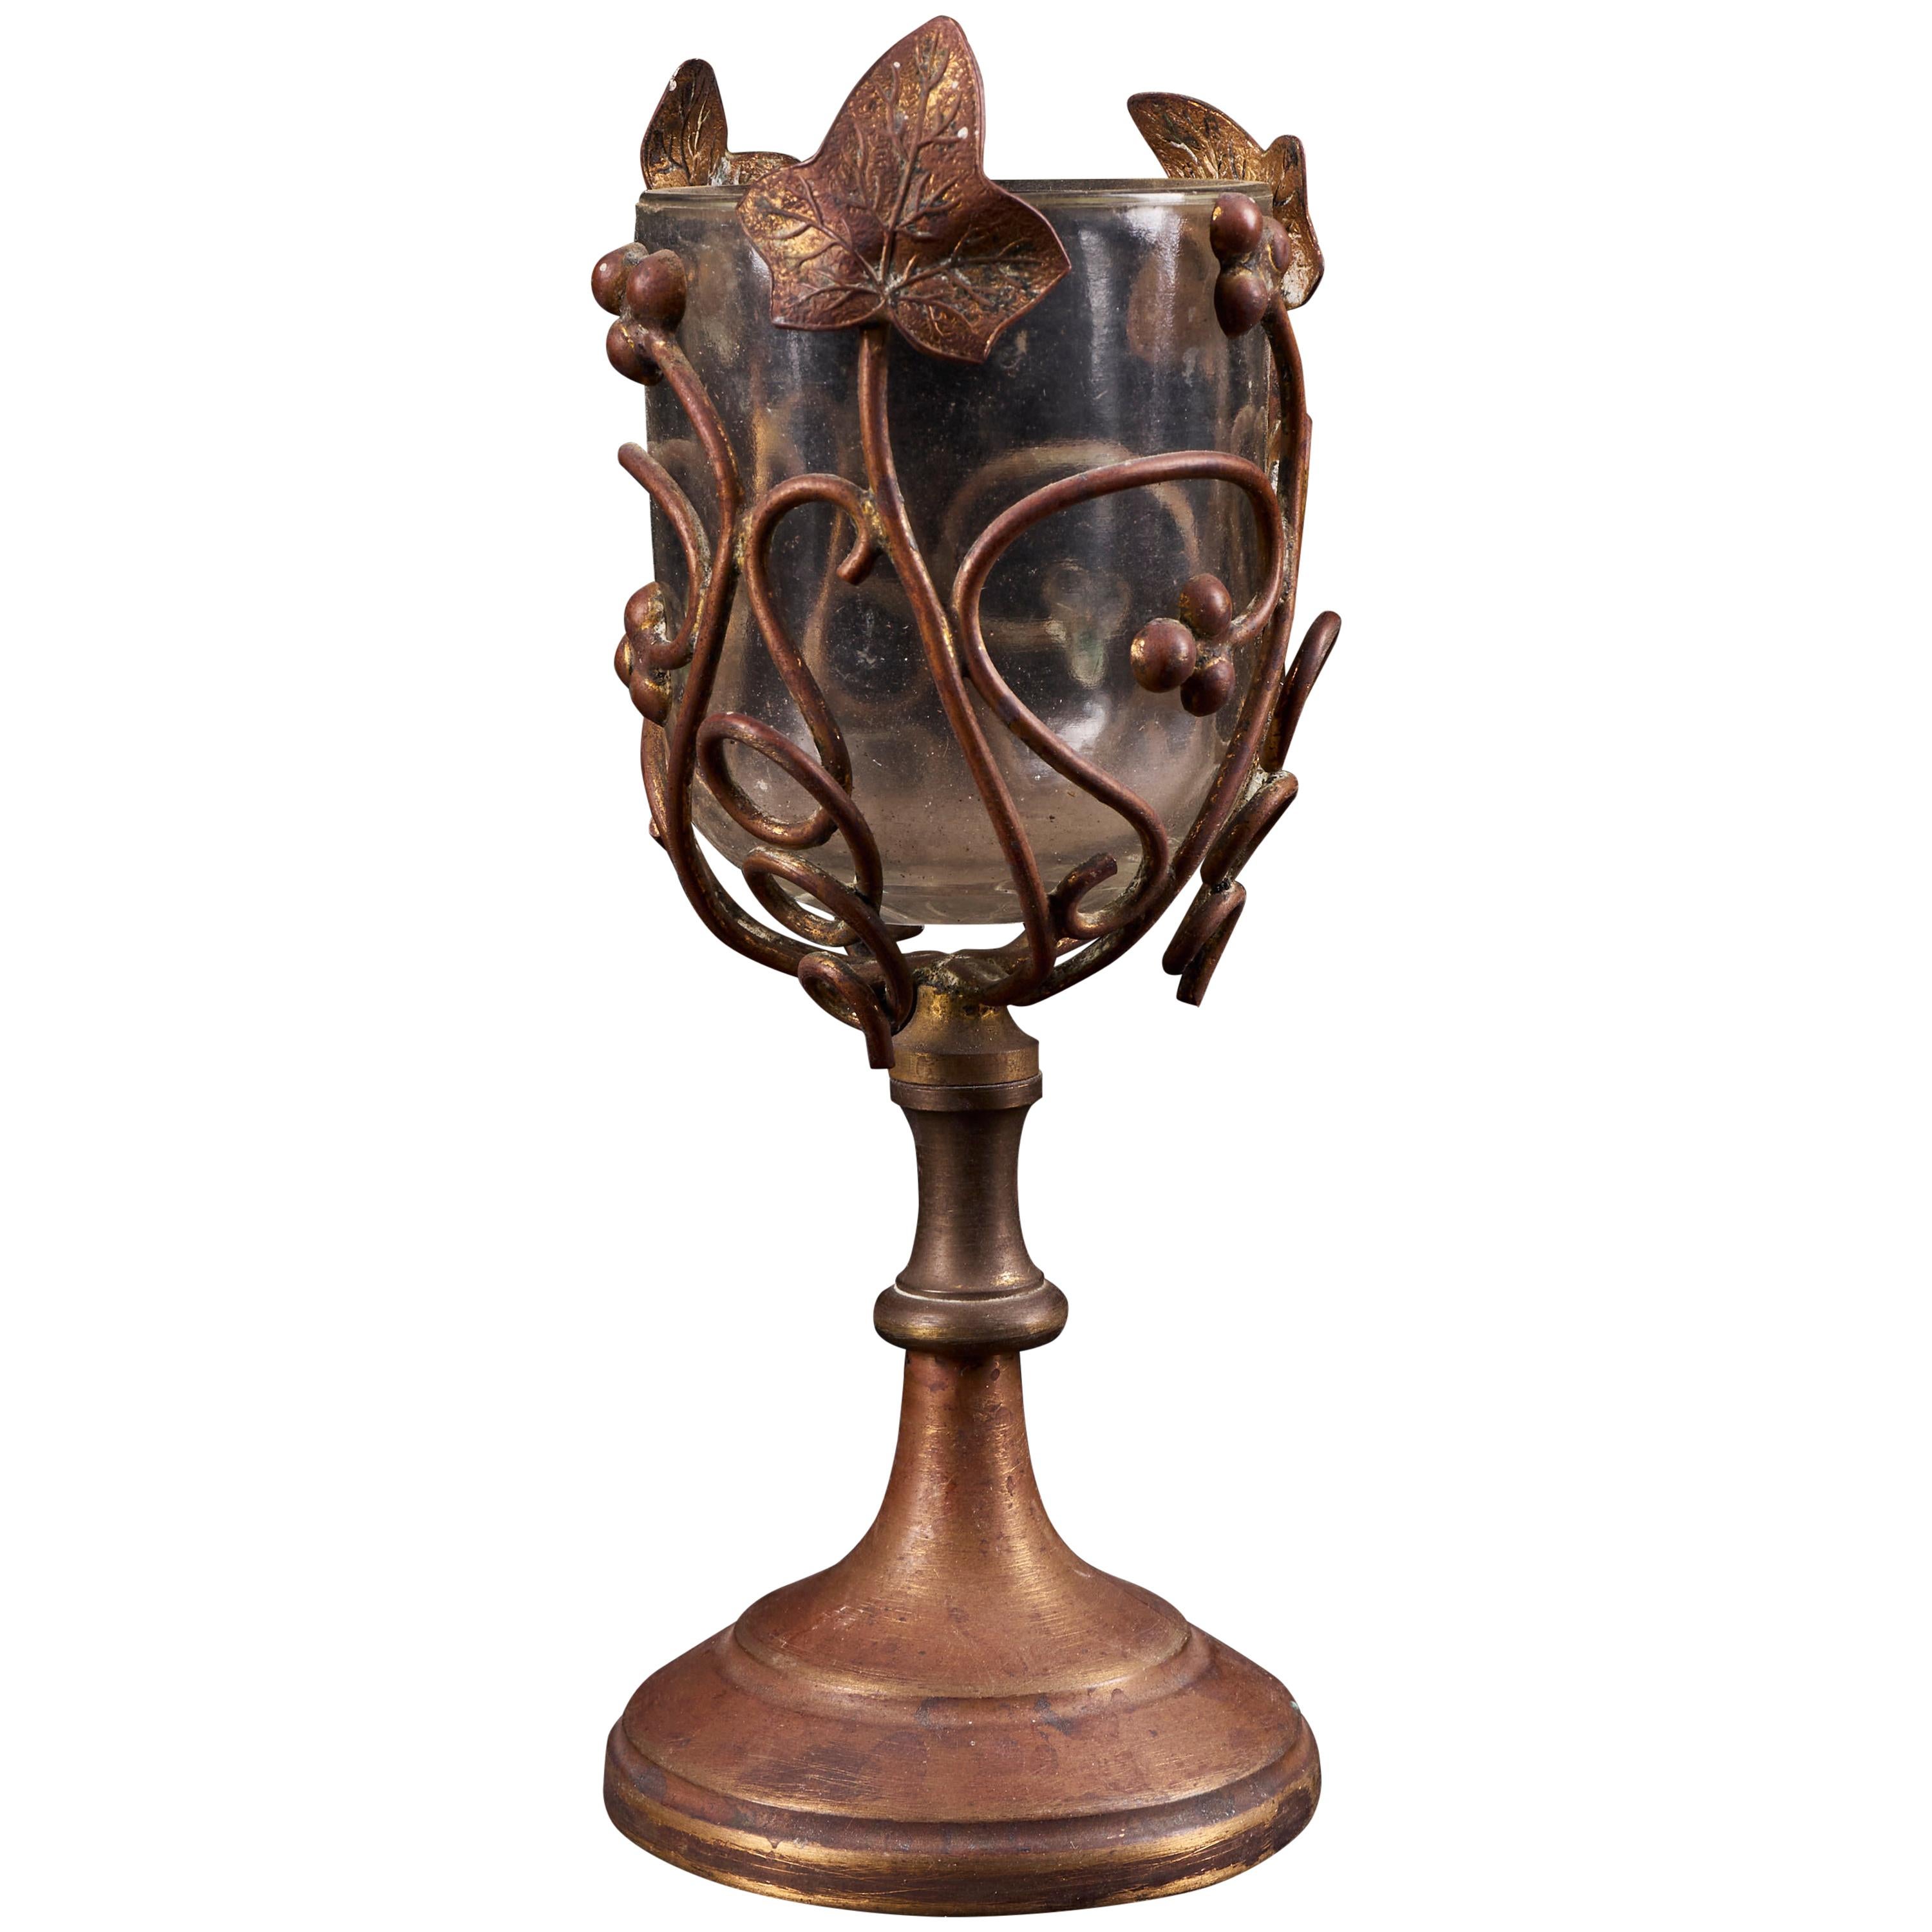 Very Charming Wineglass Made of Clear Glass and Copper Alloy